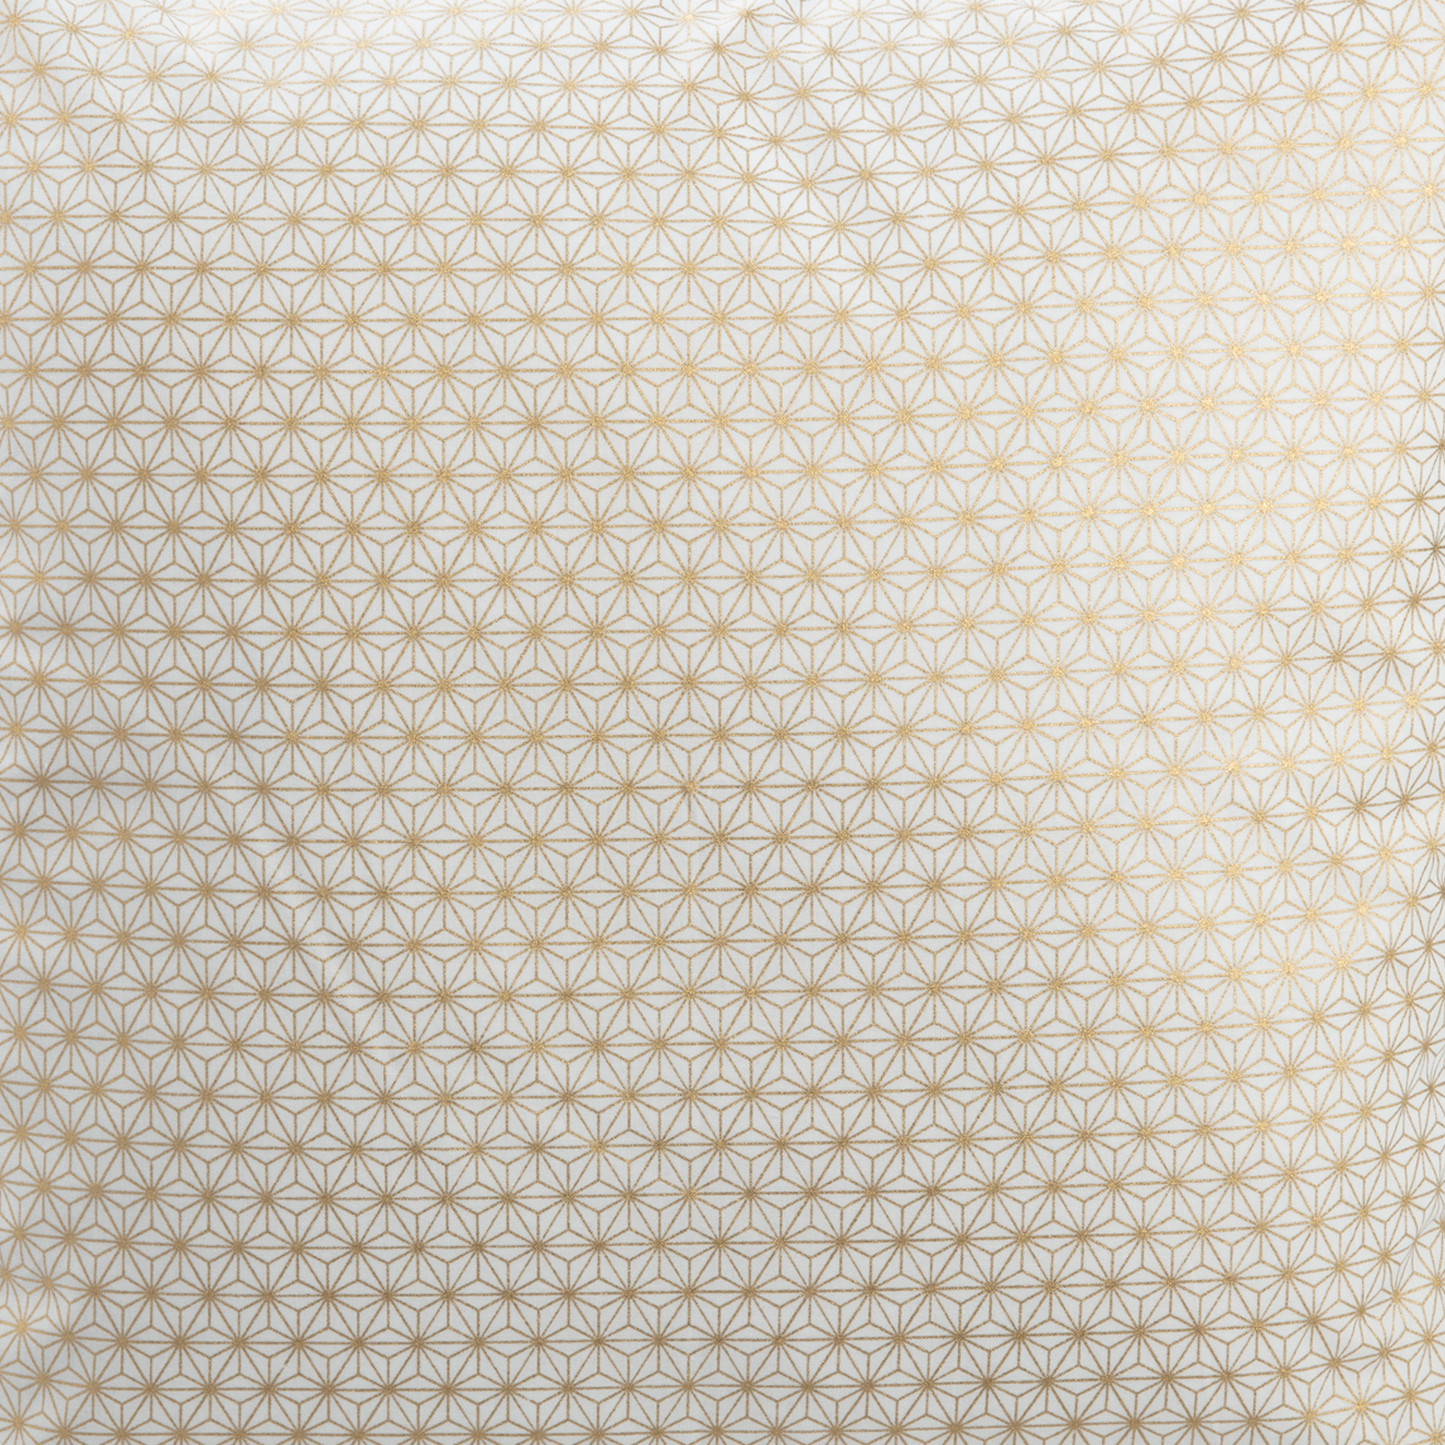 Imported Japanese Fabric - Asa No Ha Gold Sparkle_Fabric_Imported from Japan_100% Cotton_Japanese Sleep System